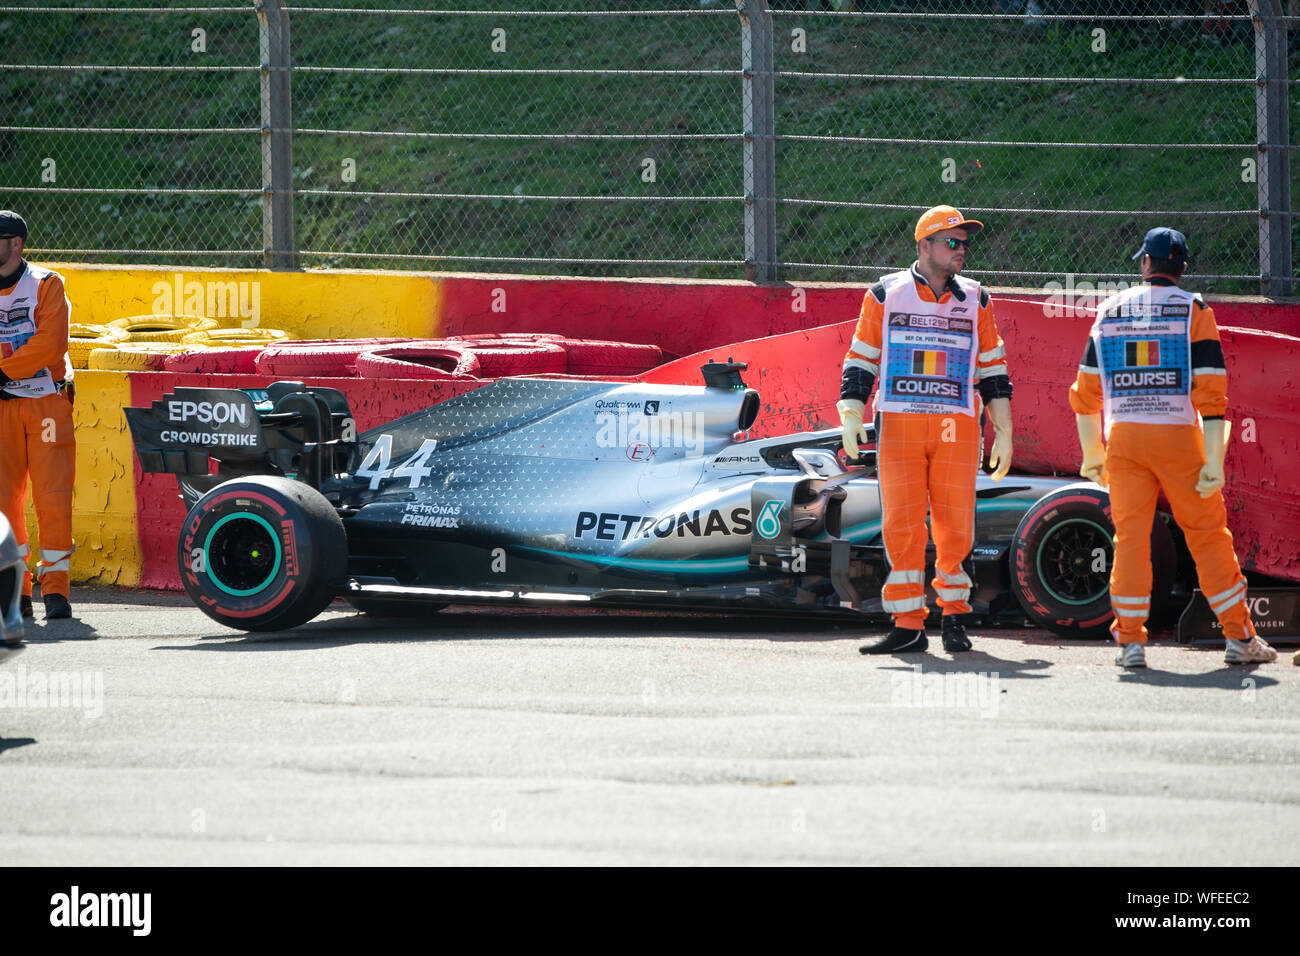 Stavelot, Belgium. 31st Aug, 2019. Aftermath of Lewis Hamilton, #44, crash in free practice 3 at the Belgian Grand Prix, Spa Francorchamps, as his Mercedes is pulled from the catch barriers. Credit: Will Broadhead/Alamy Live News Stock Photo